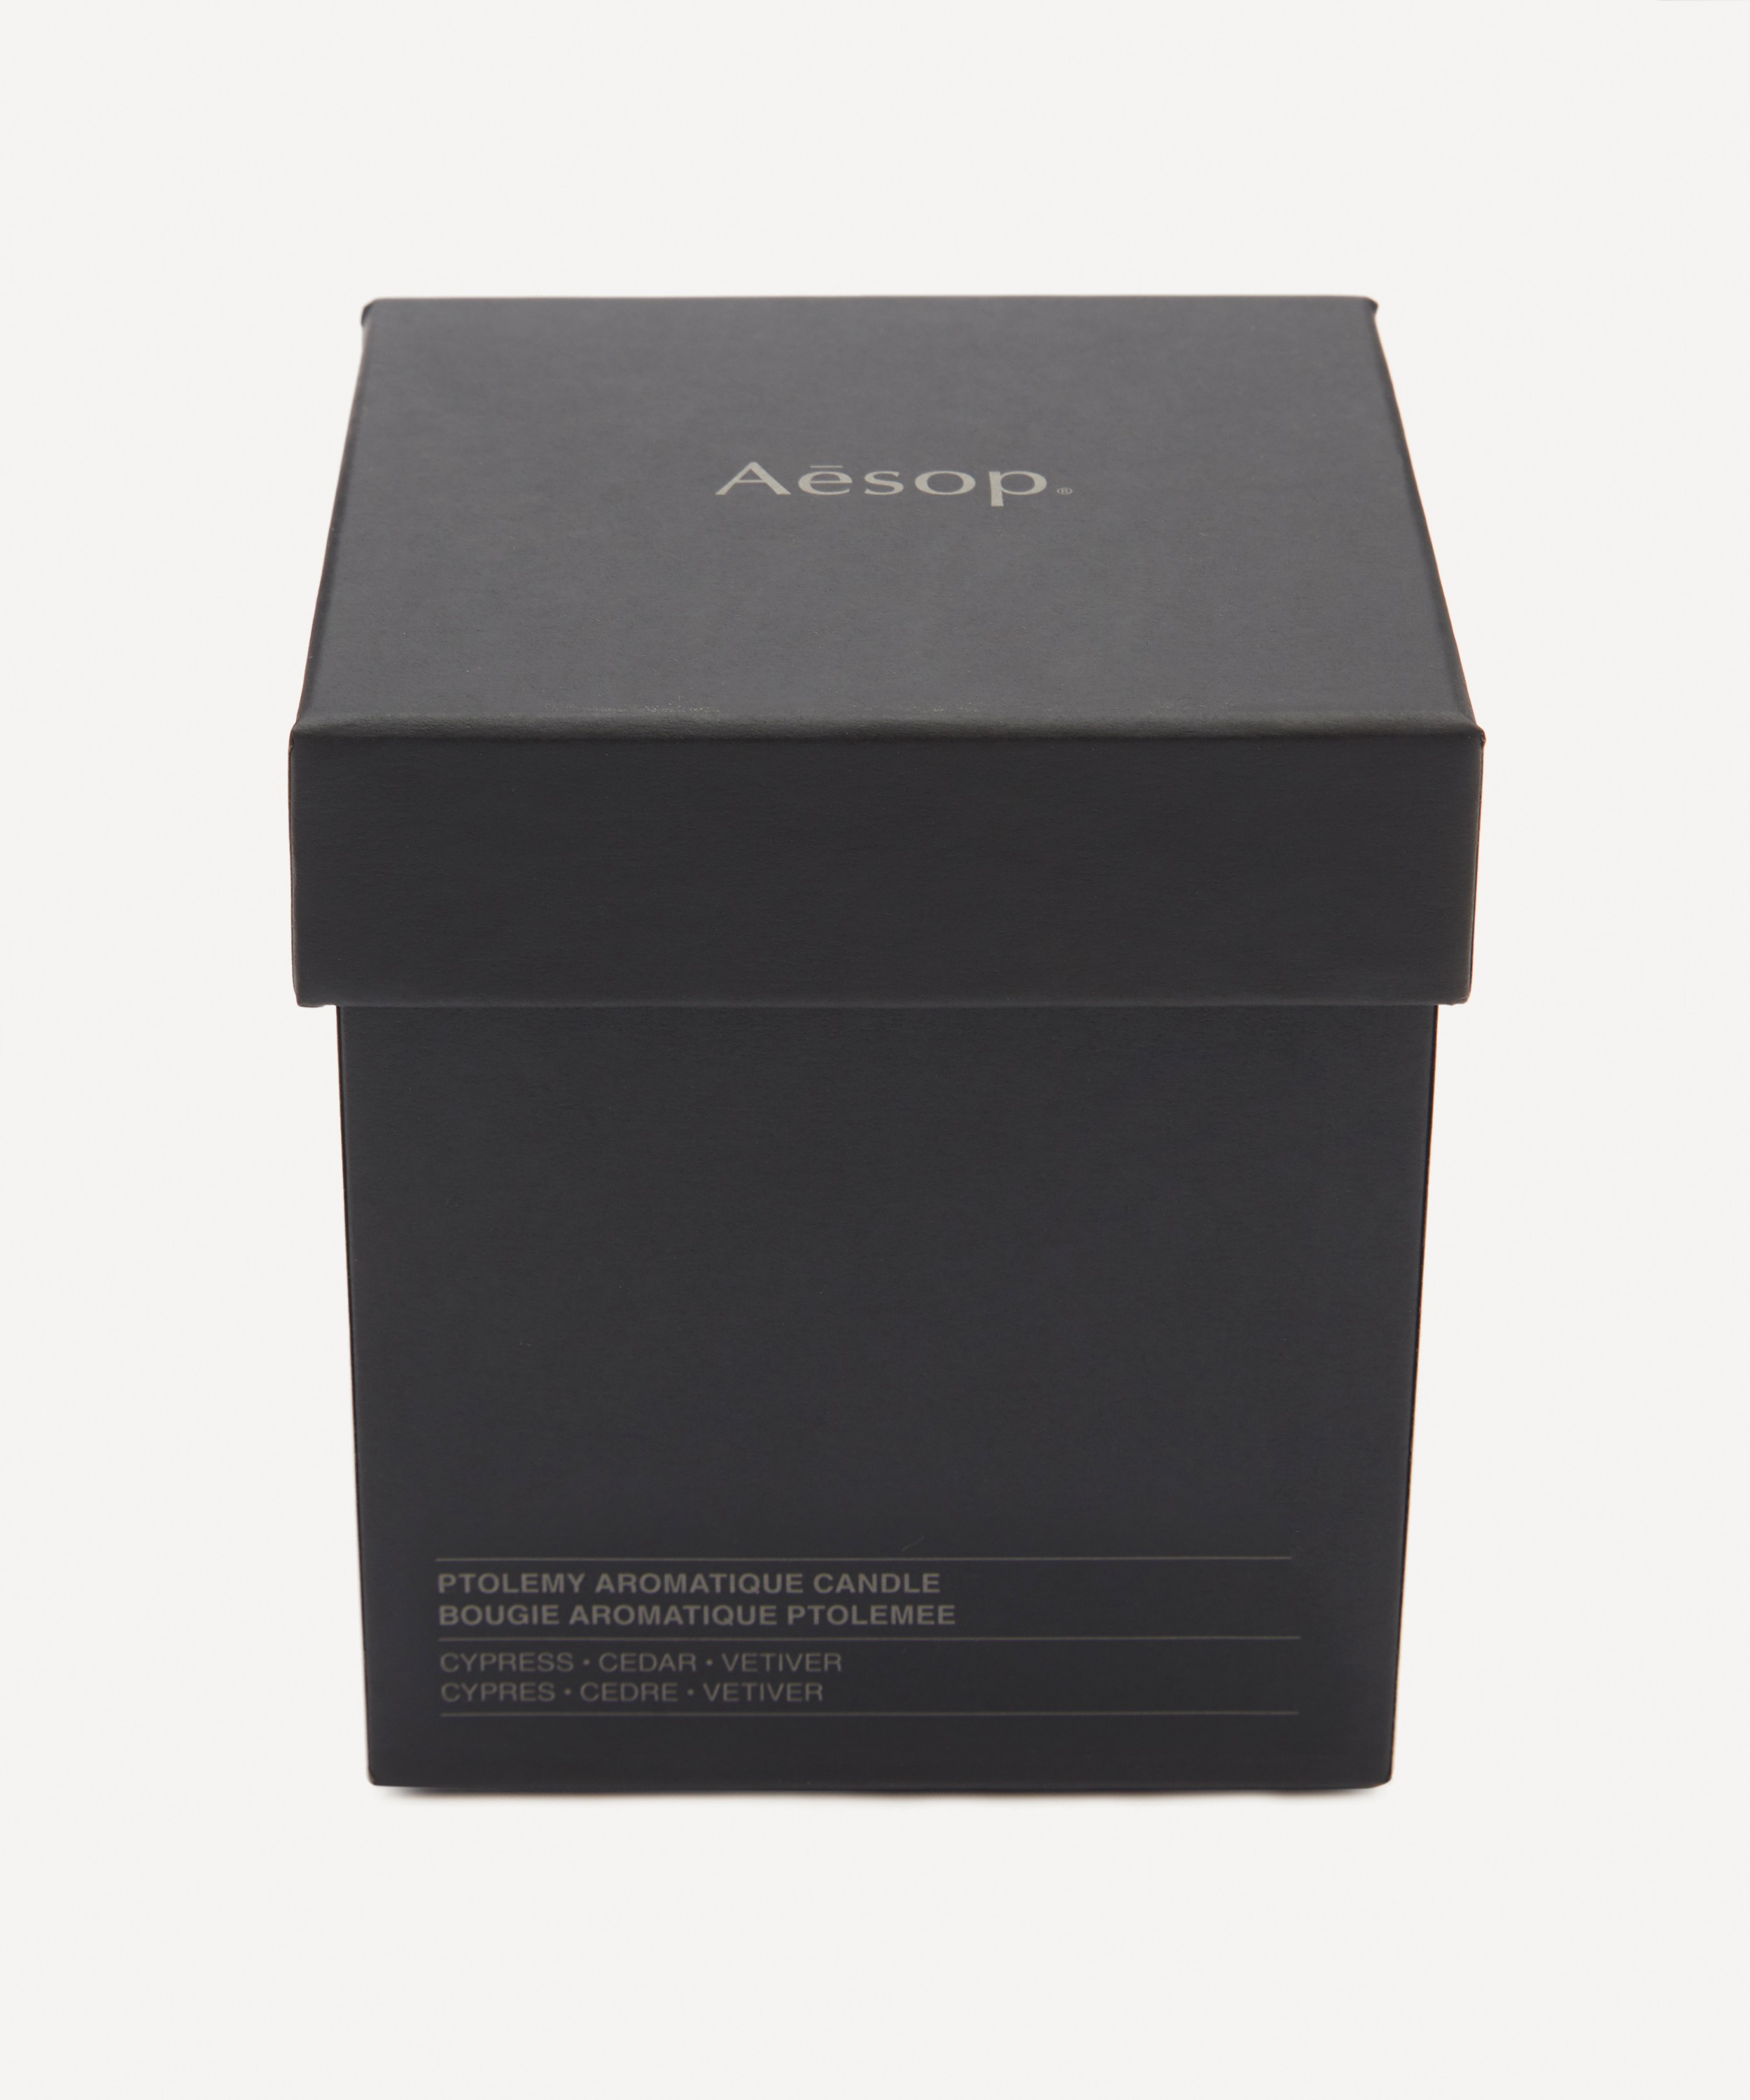 Aesop - Ptolemy Aromatique Candle 300g image number 3